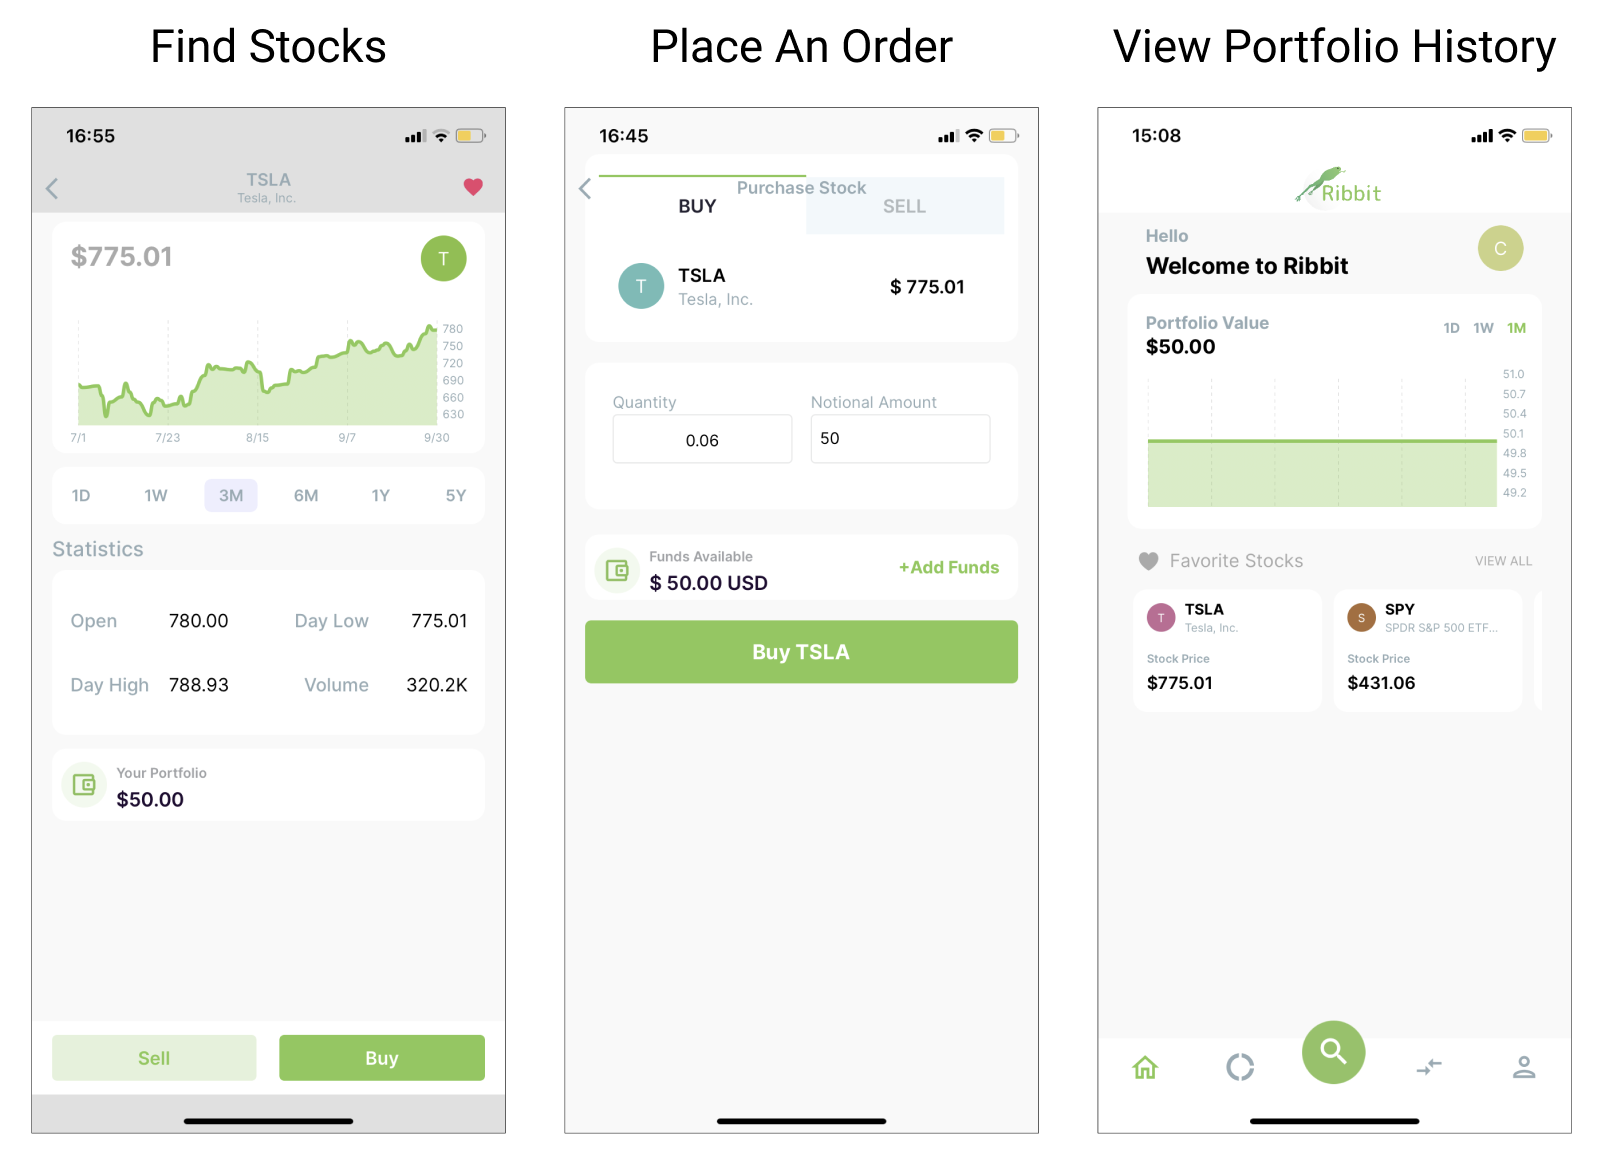 Typical screens for trading and portfolio